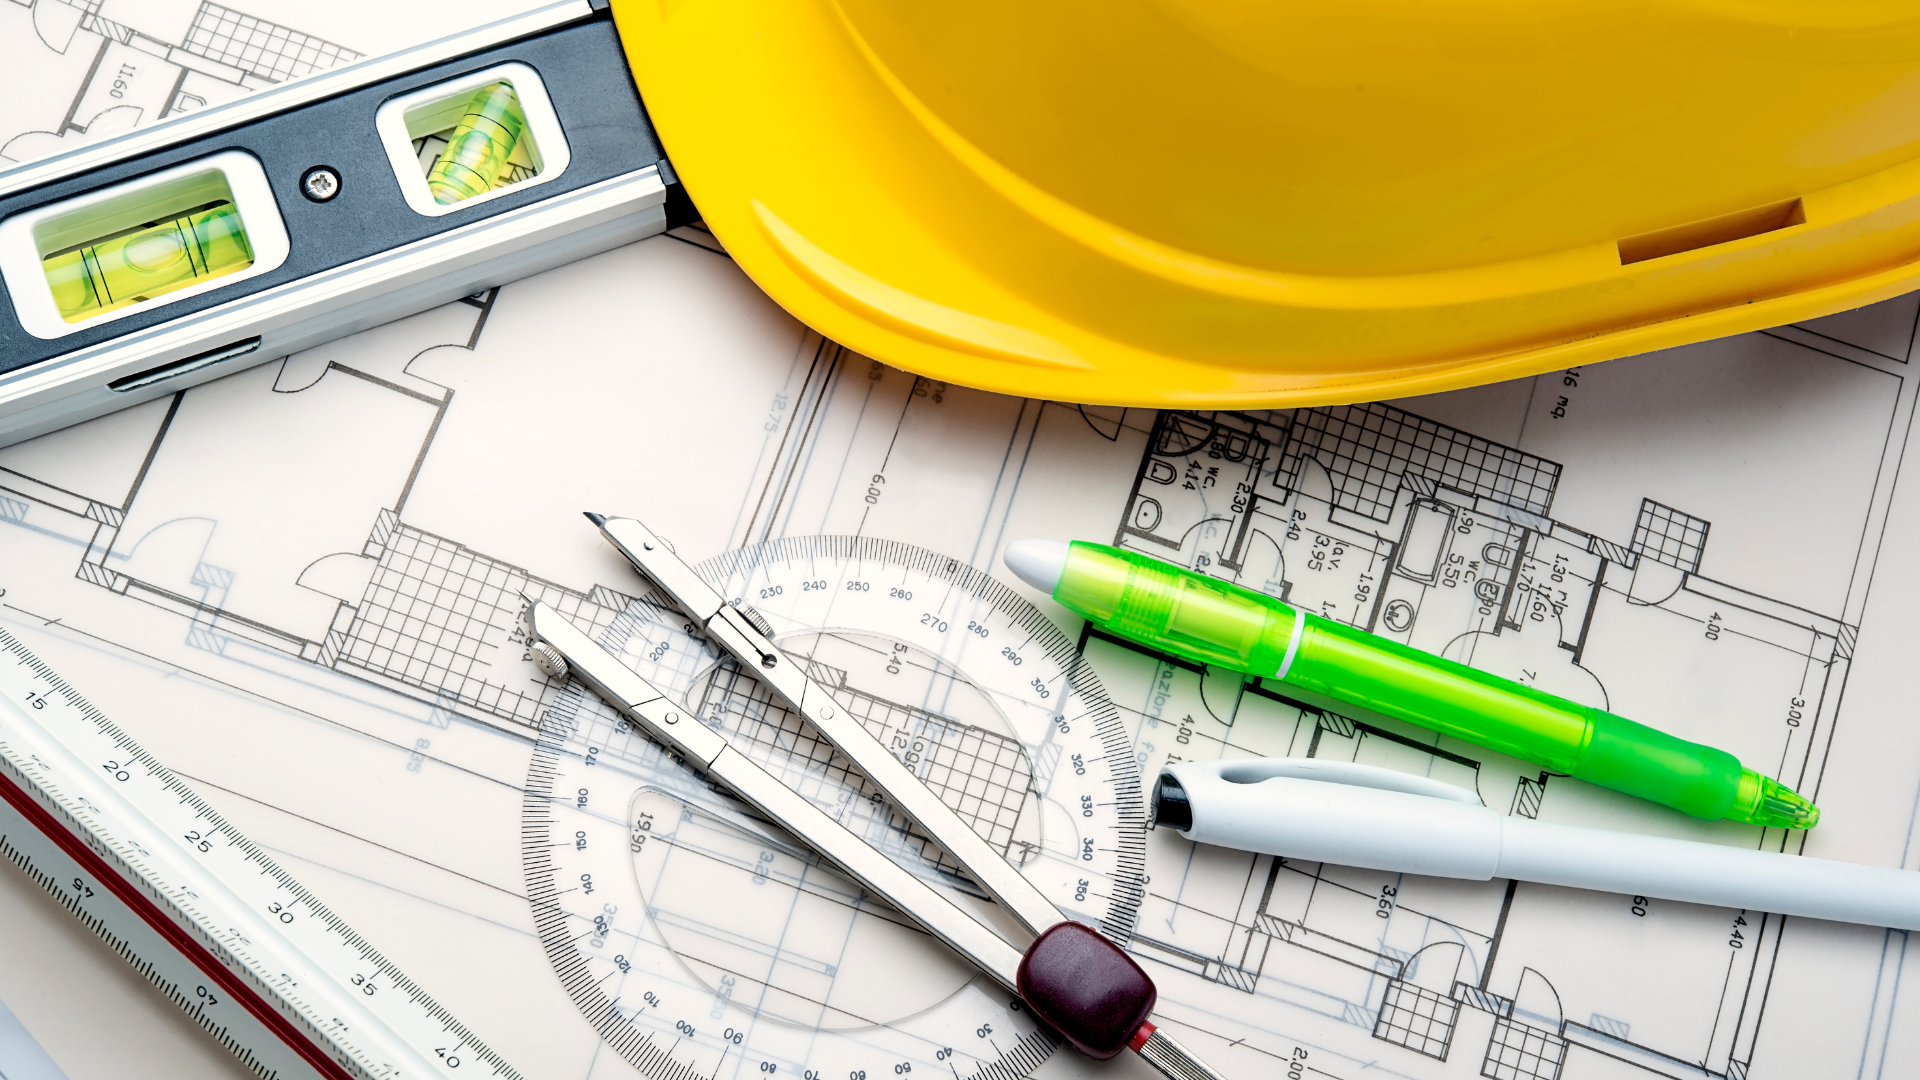 A hard hat and measuring tools on top of construction drawings